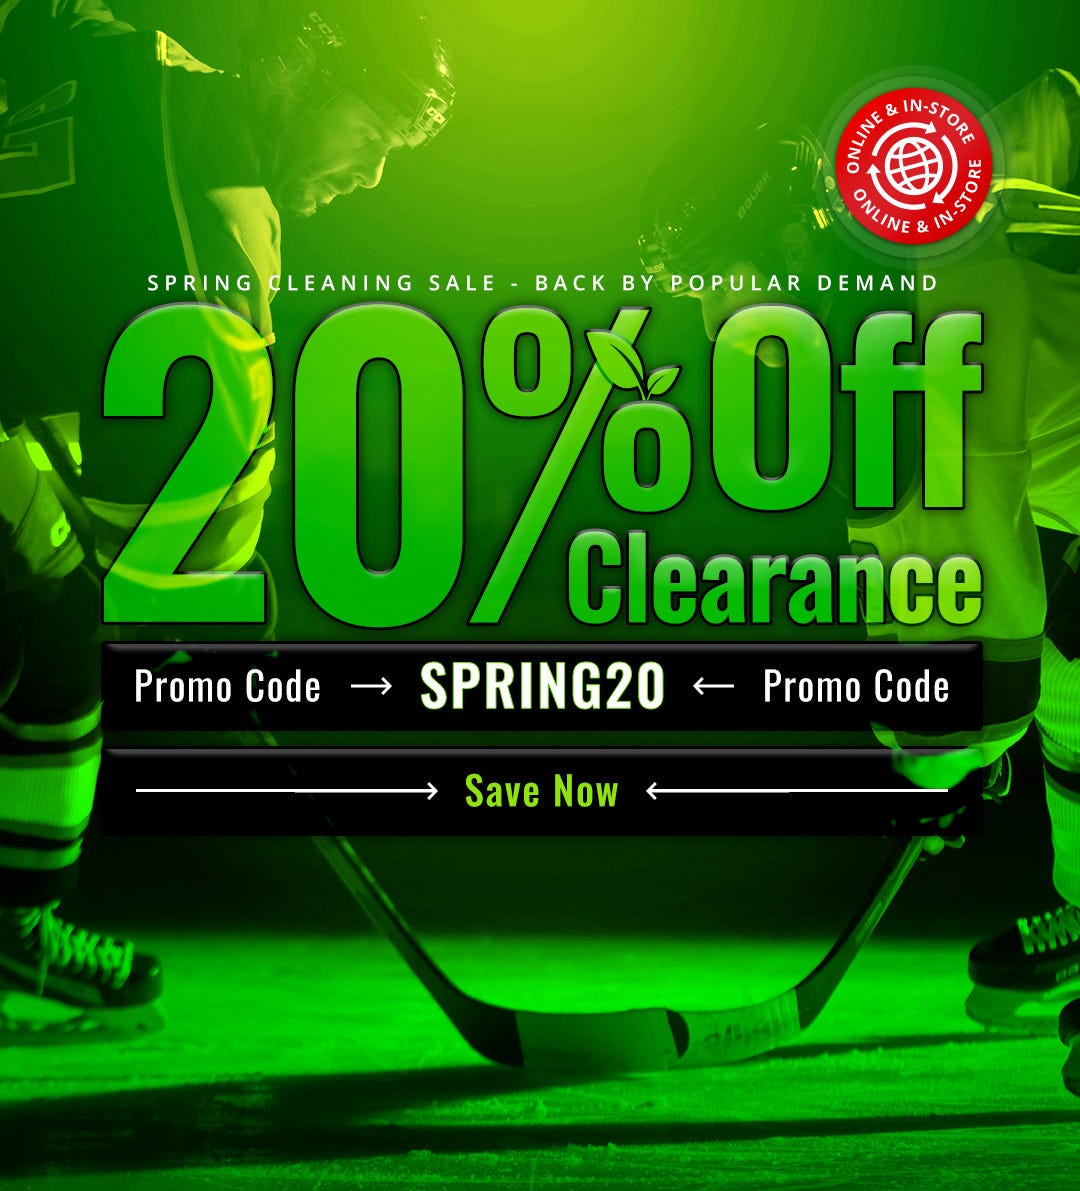 Spring Cleaning Sale - Back by Popular Demand: 20% Off Clearance